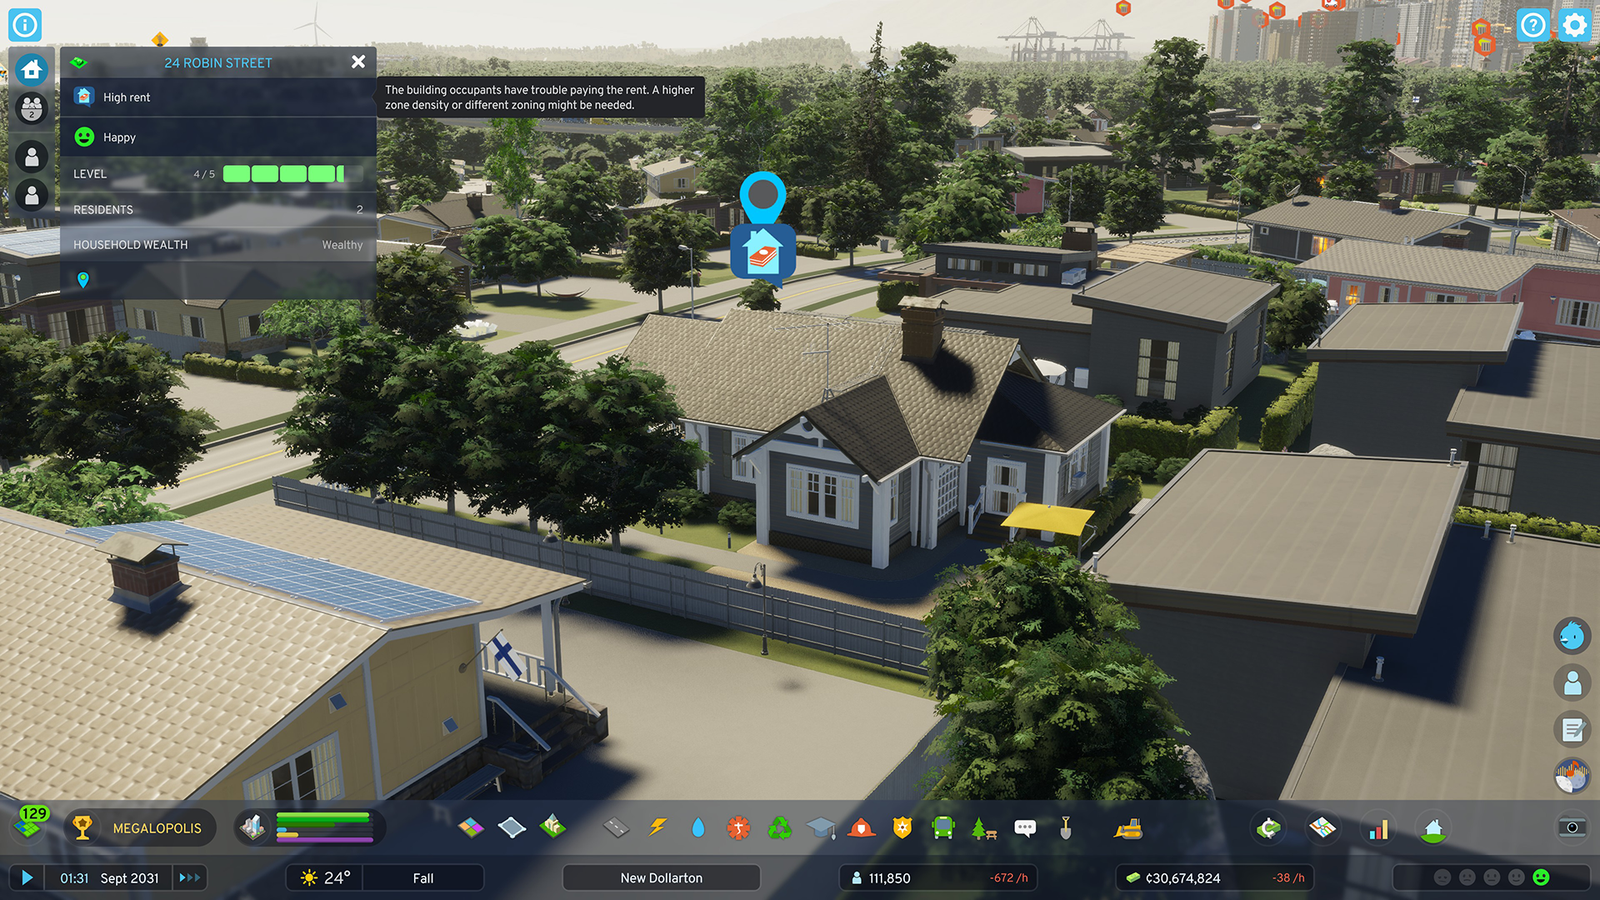 Cities: Skylines 2 will intentionally launch with performance issues